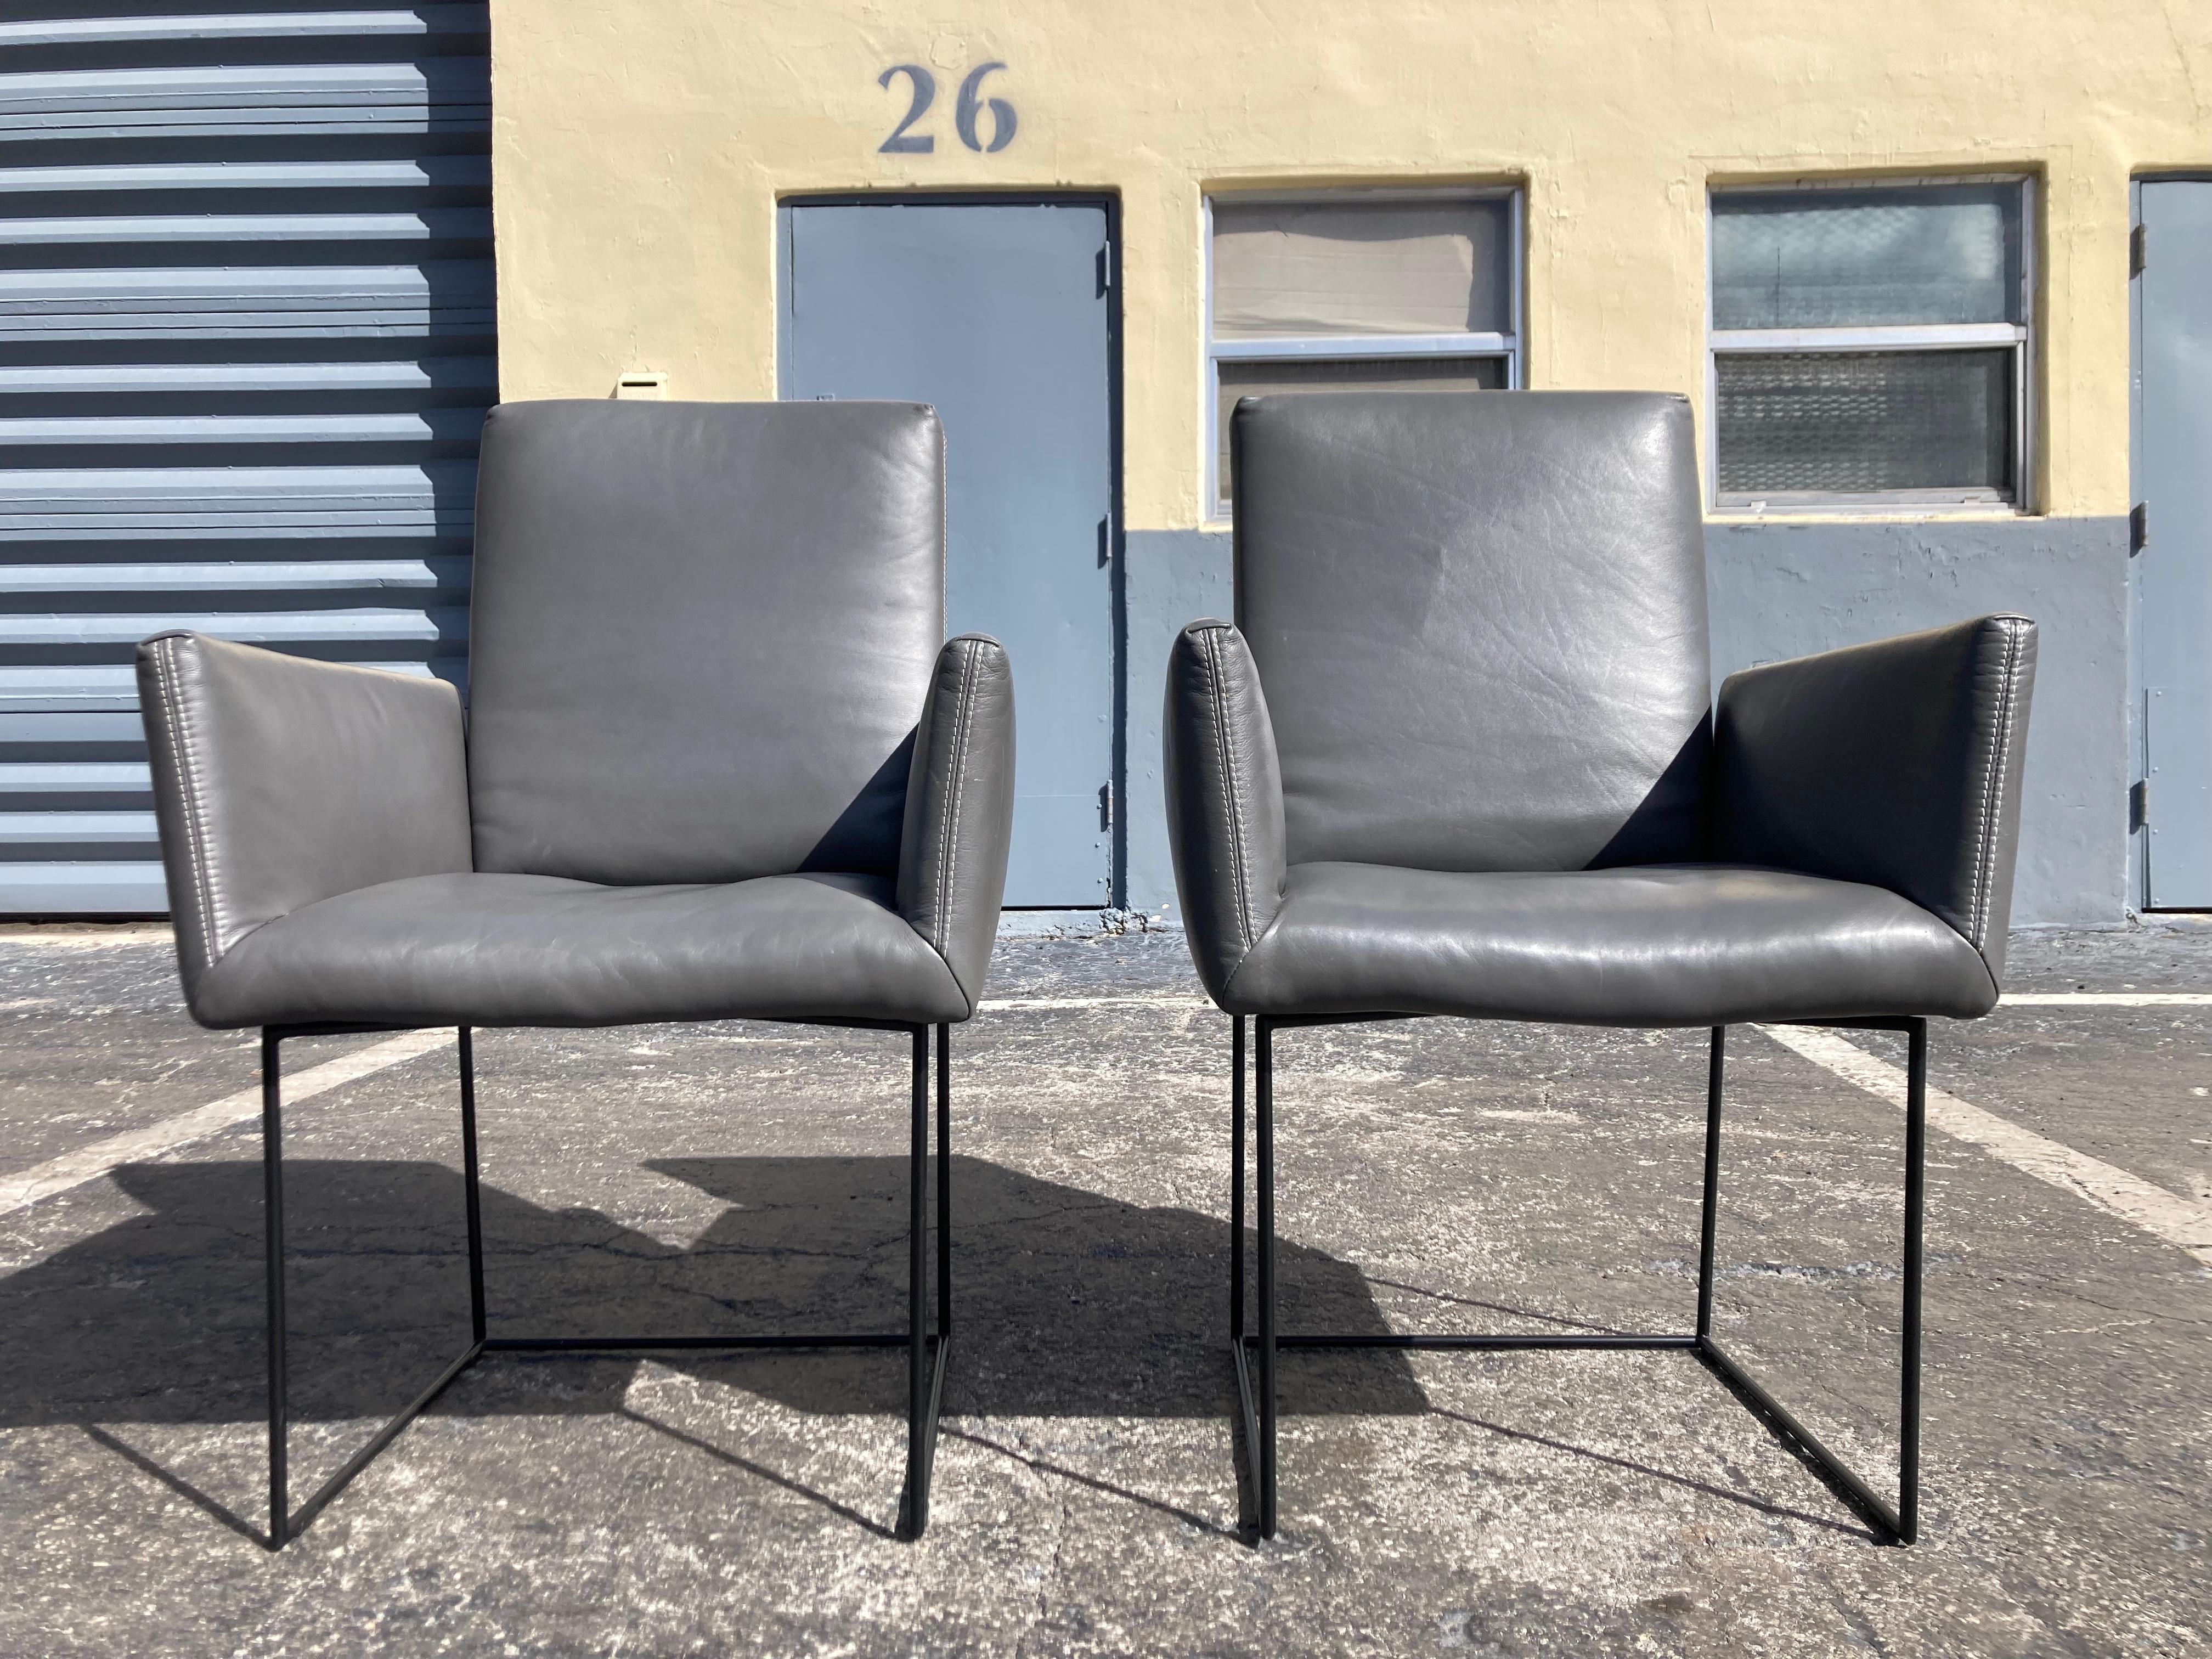 Pair Leather Arm Chairs Designed by KURT BEIER & KATI QUINGER for Bullfrog  For Sale 1